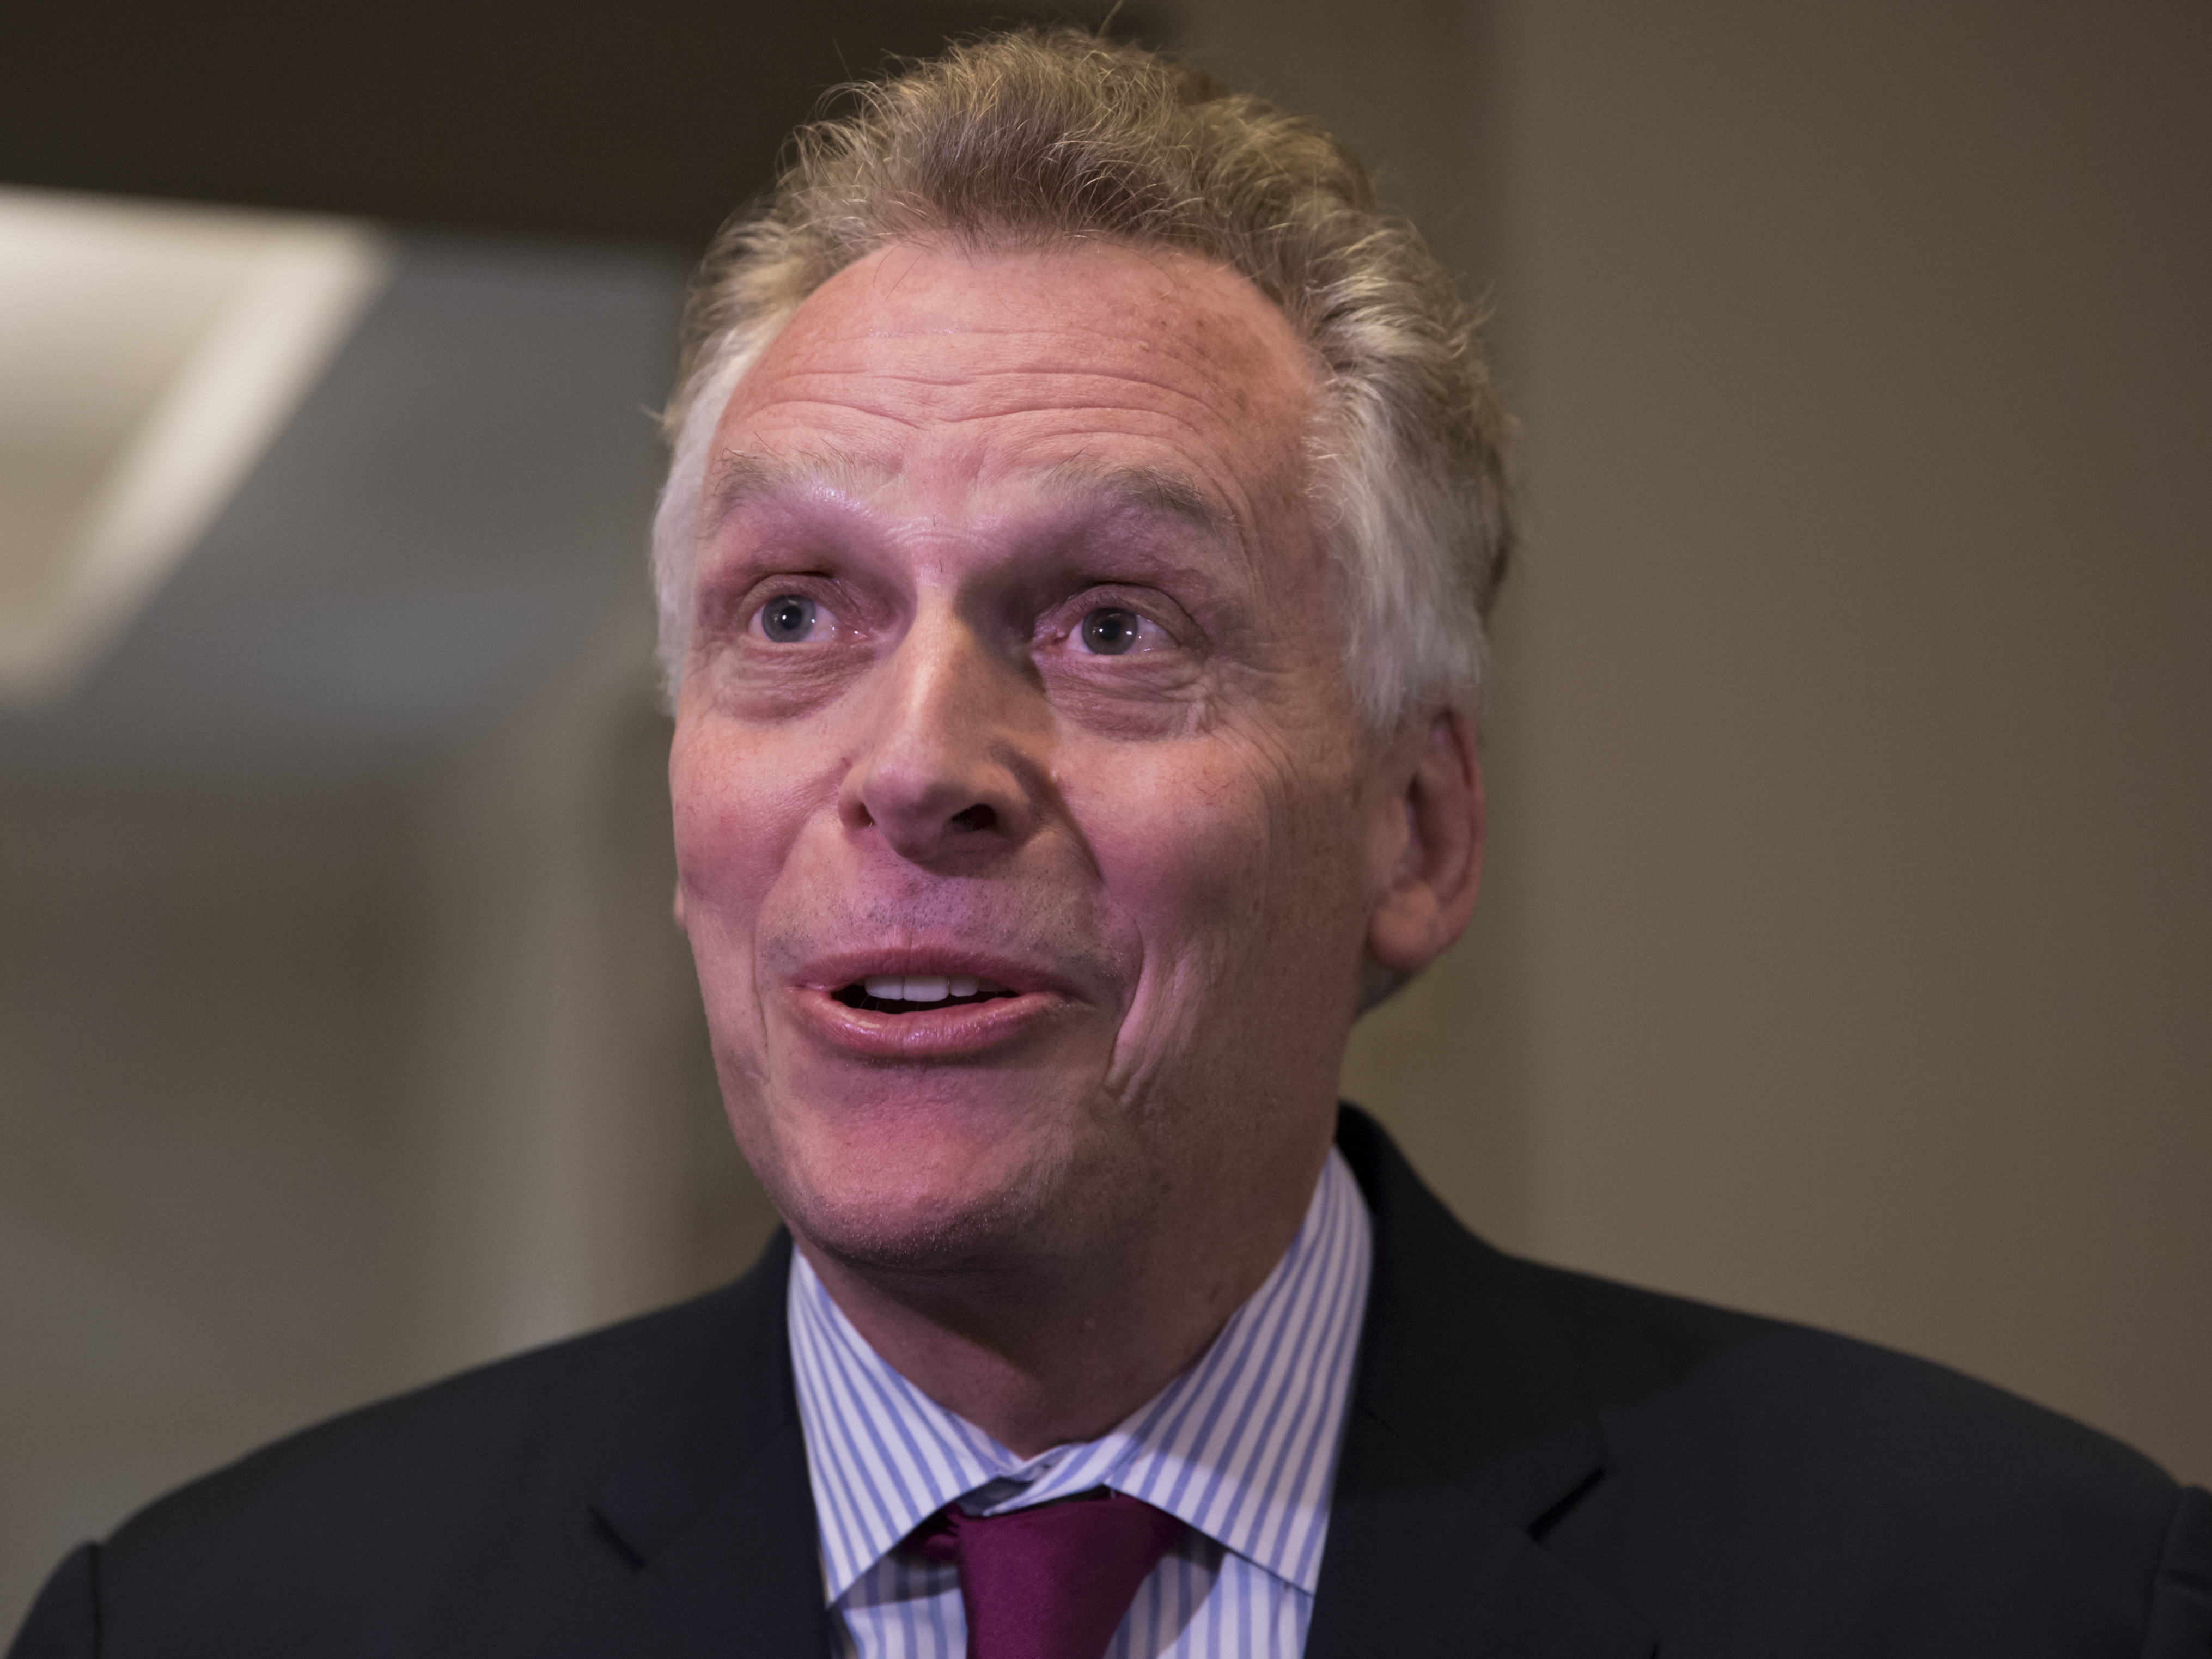 Virginia Gov. Terry McAuliffe announced that his administration would individually restore voting rights to 13,000 felons who have served their time. Last month, the Virginia Supreme Court ruled that McAuliffe lacked the constitutional authority to enfranchise more than 200,000 felons en masse. (Photo by J. Scott Applewhite/Associated Press)